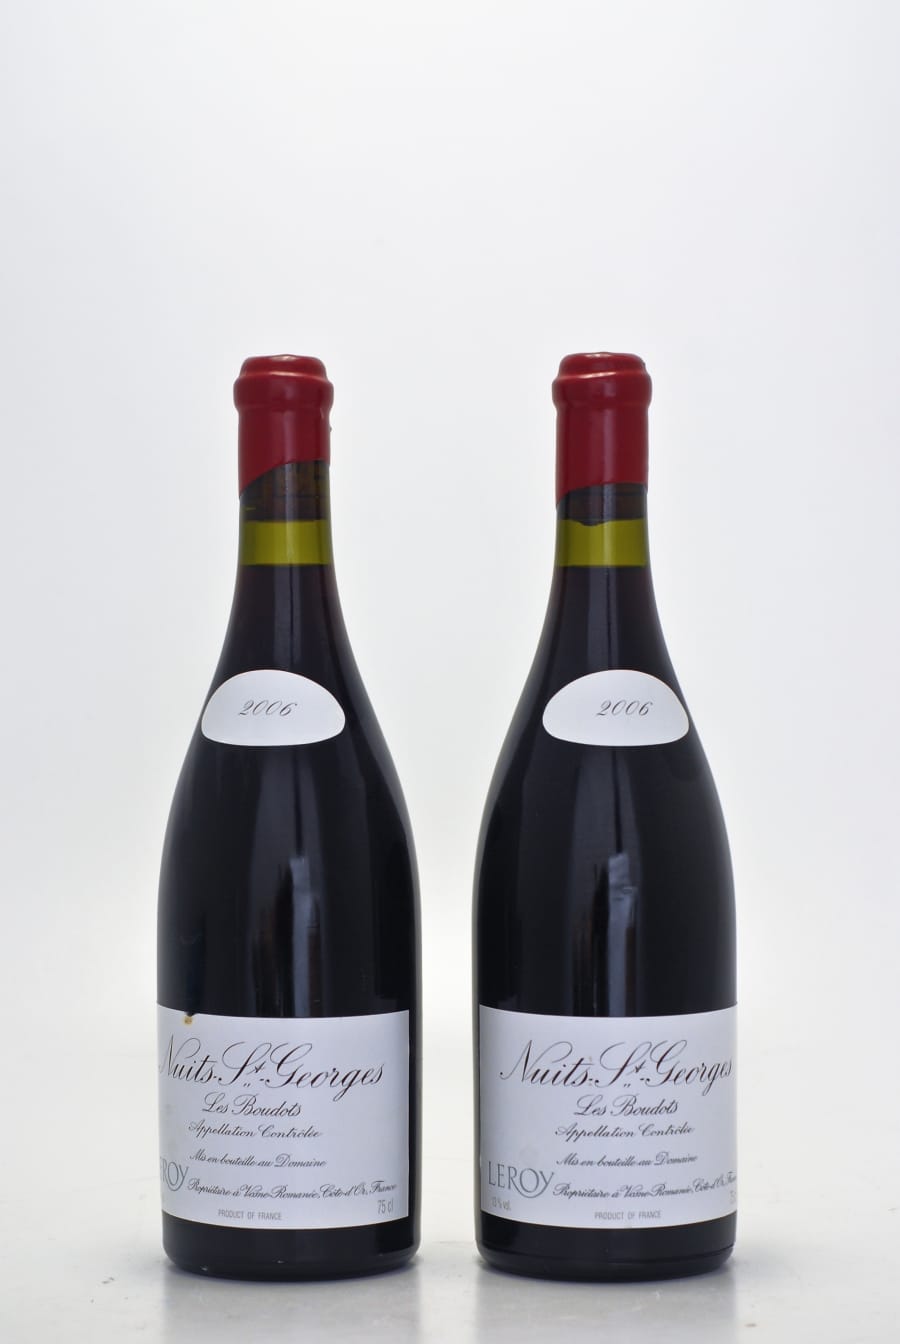 Domaine Leroy - Nuits St. Georges Les Boudots 2006 From Original Wooden Case